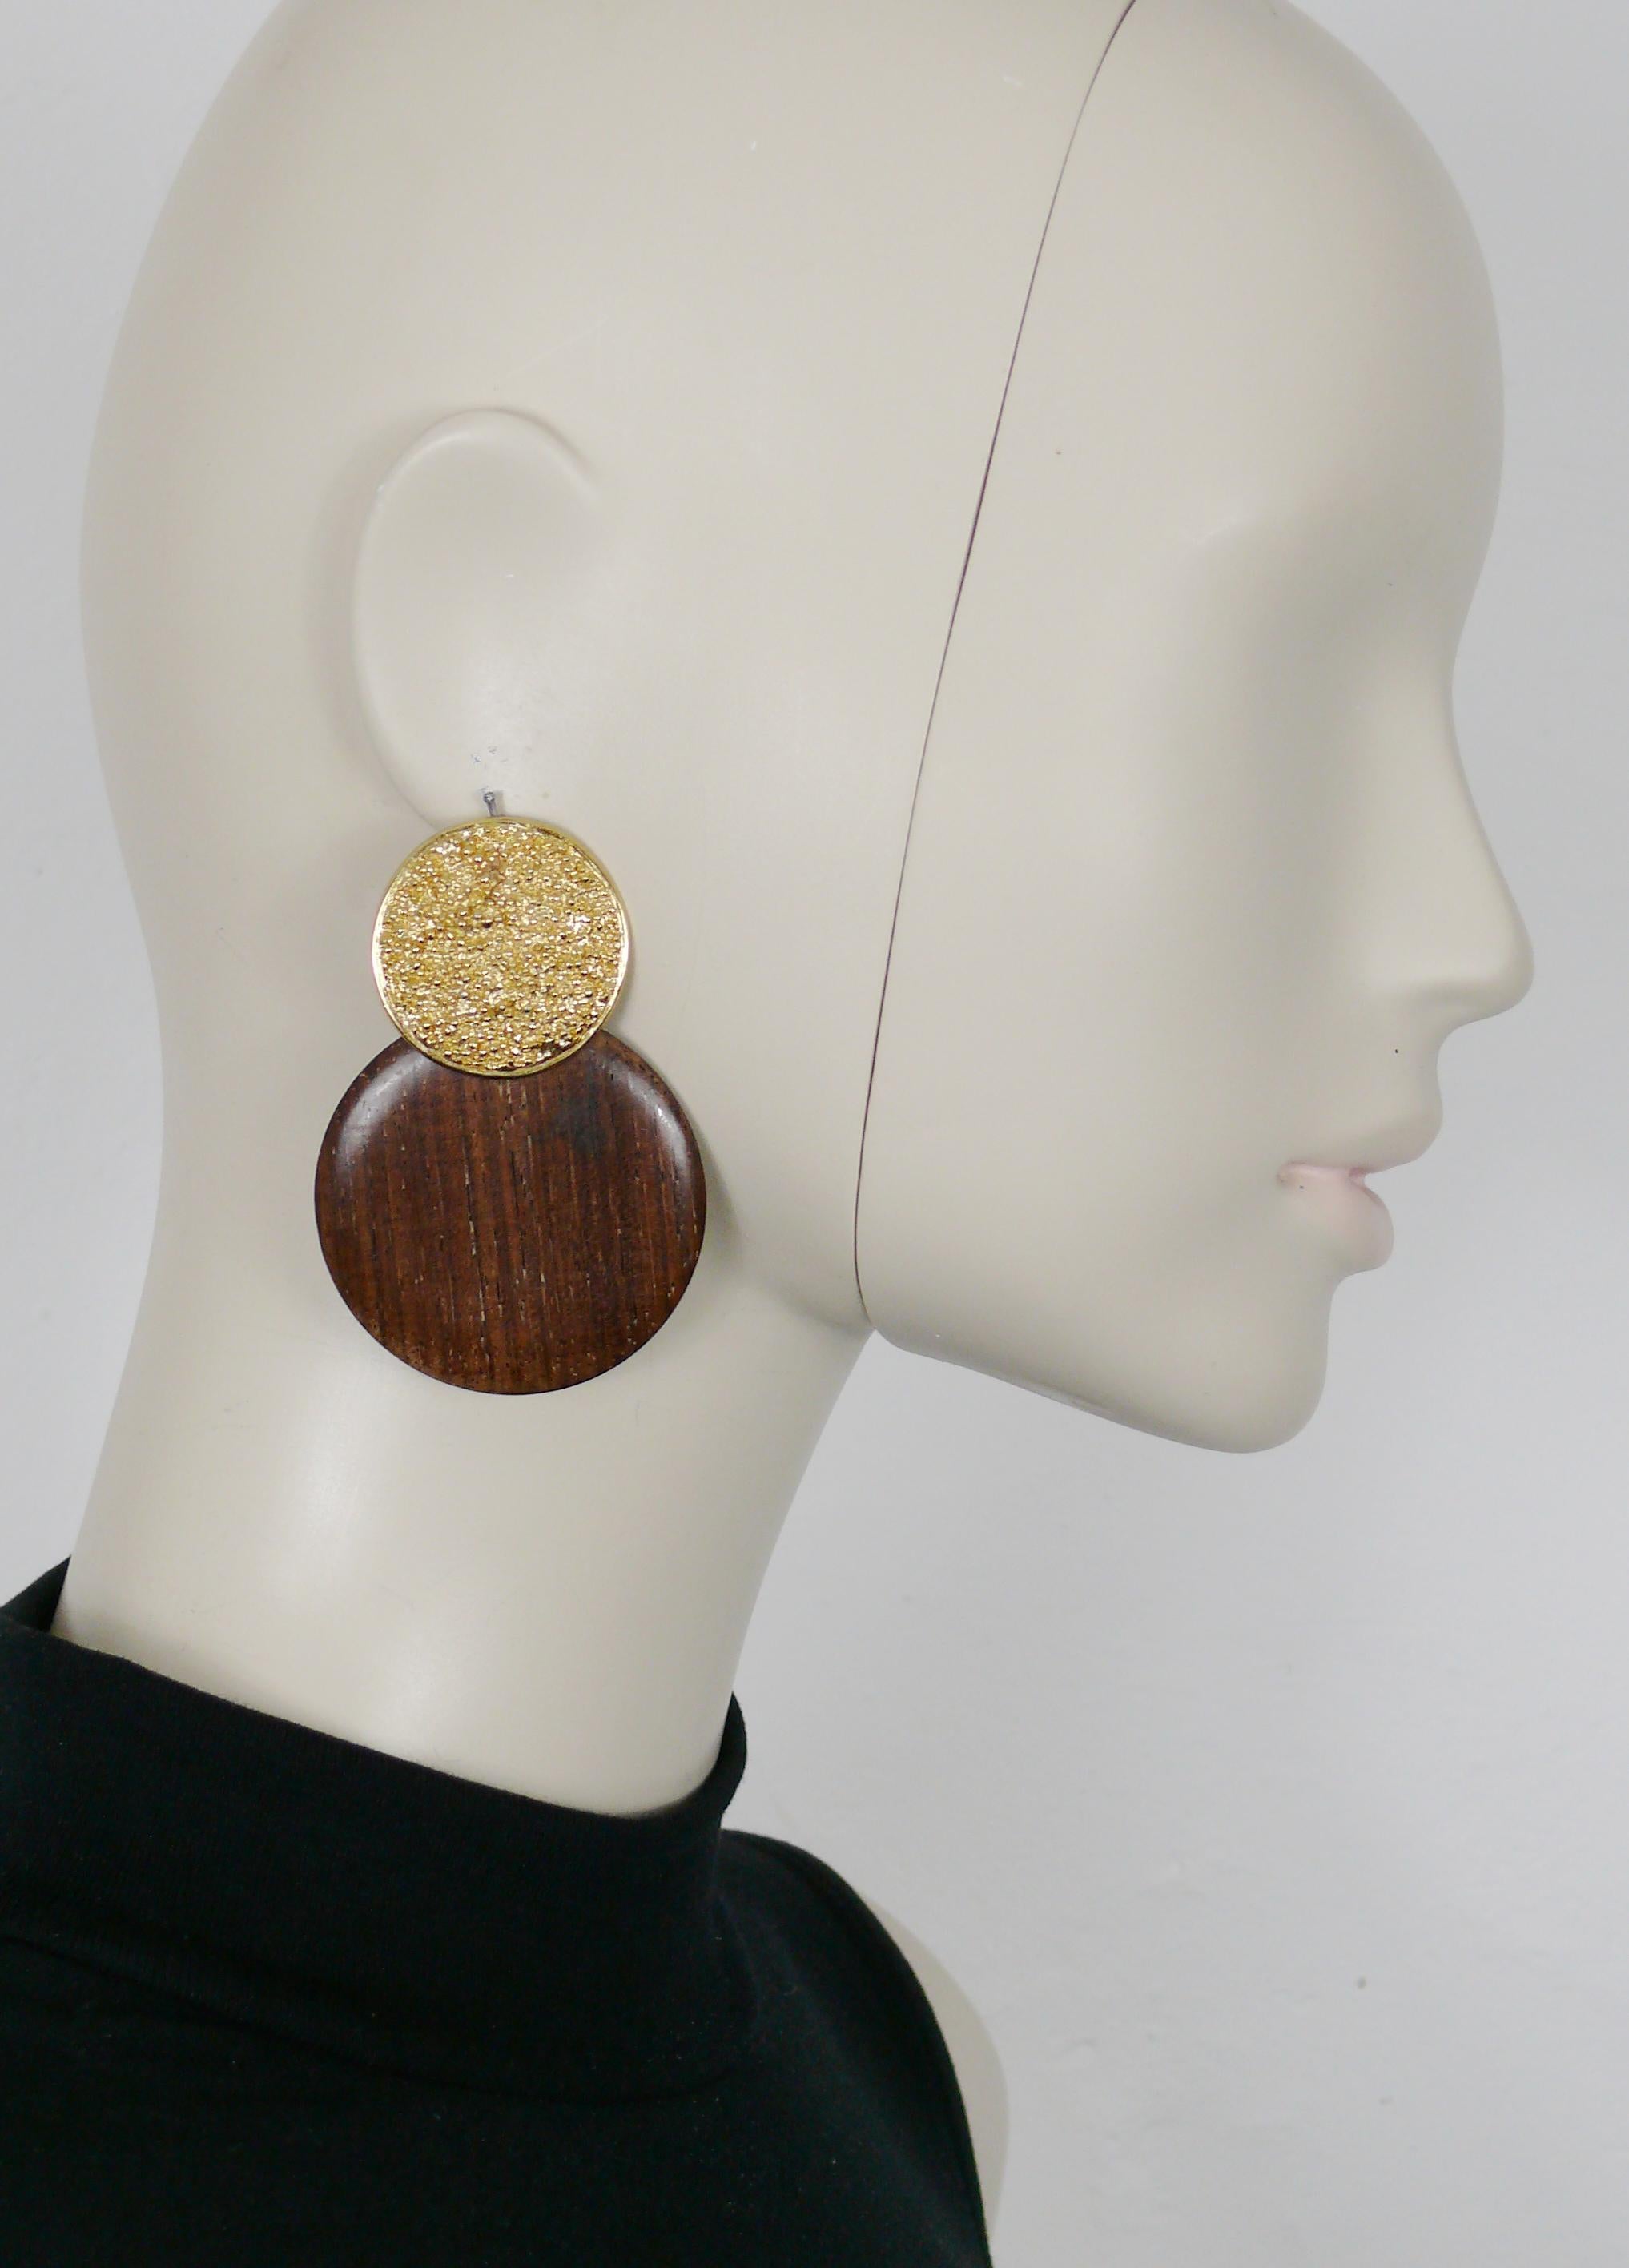 YVES SAINT LAURENT vintage massive dangling earrings (clip-on) featuring a large wood disc topped by a textured gold toned disc.

Embossed YSL Made in France.

Indicative measurements : height approx. 7.2 cm (2.83 inches) / max. diameter approx. 4.8